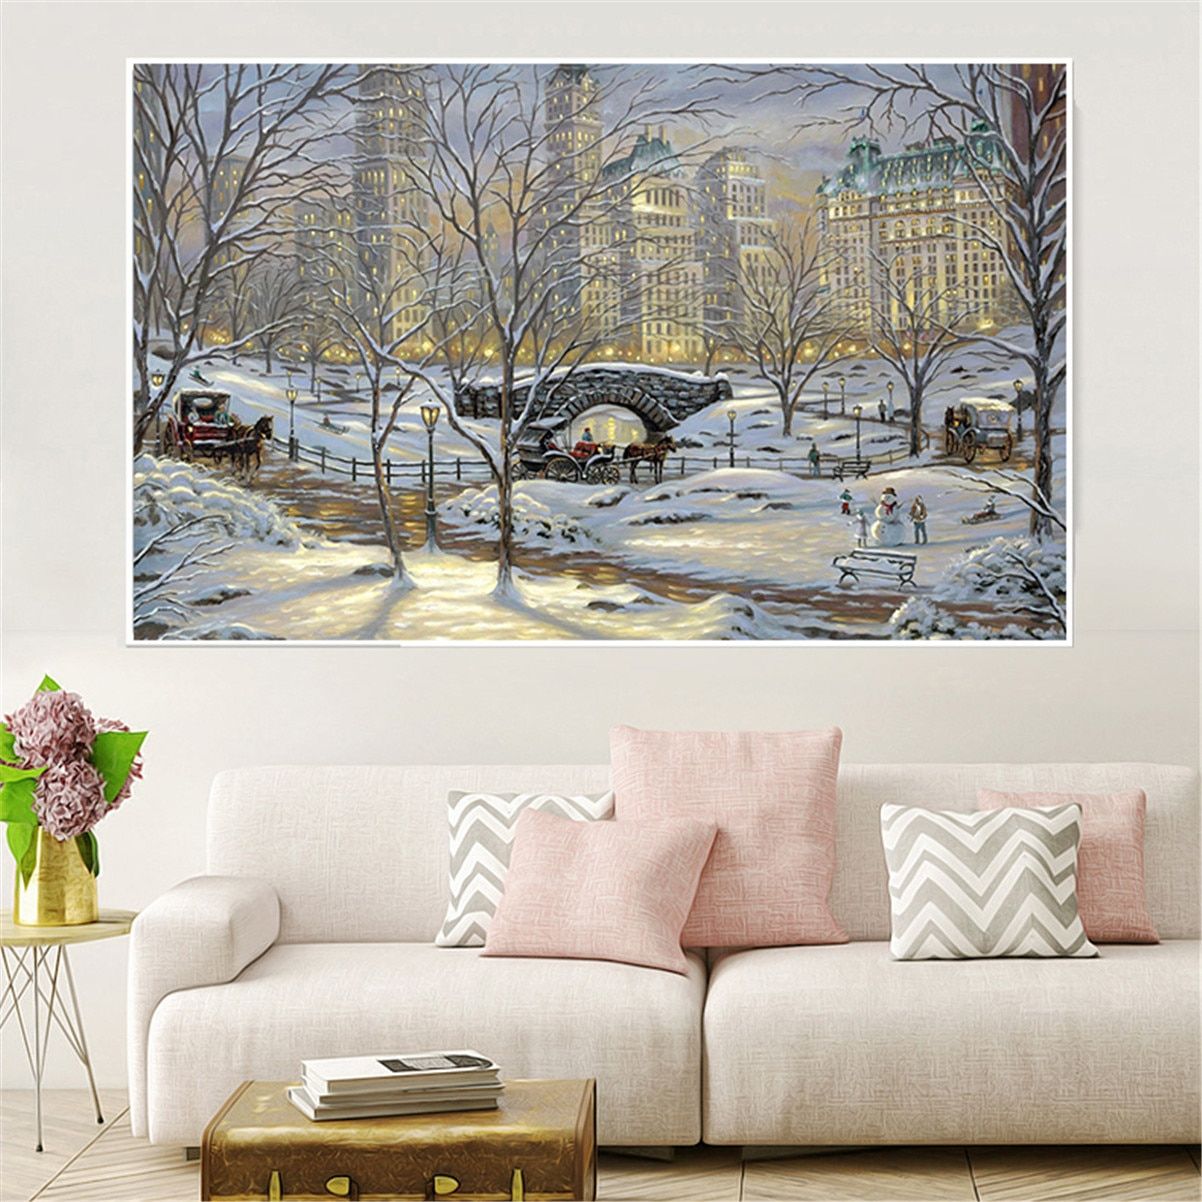 Wall Painting Winter Snow Landscape Bridge Poster Prints For Latest Snow Wall Art (View 5 of 20)